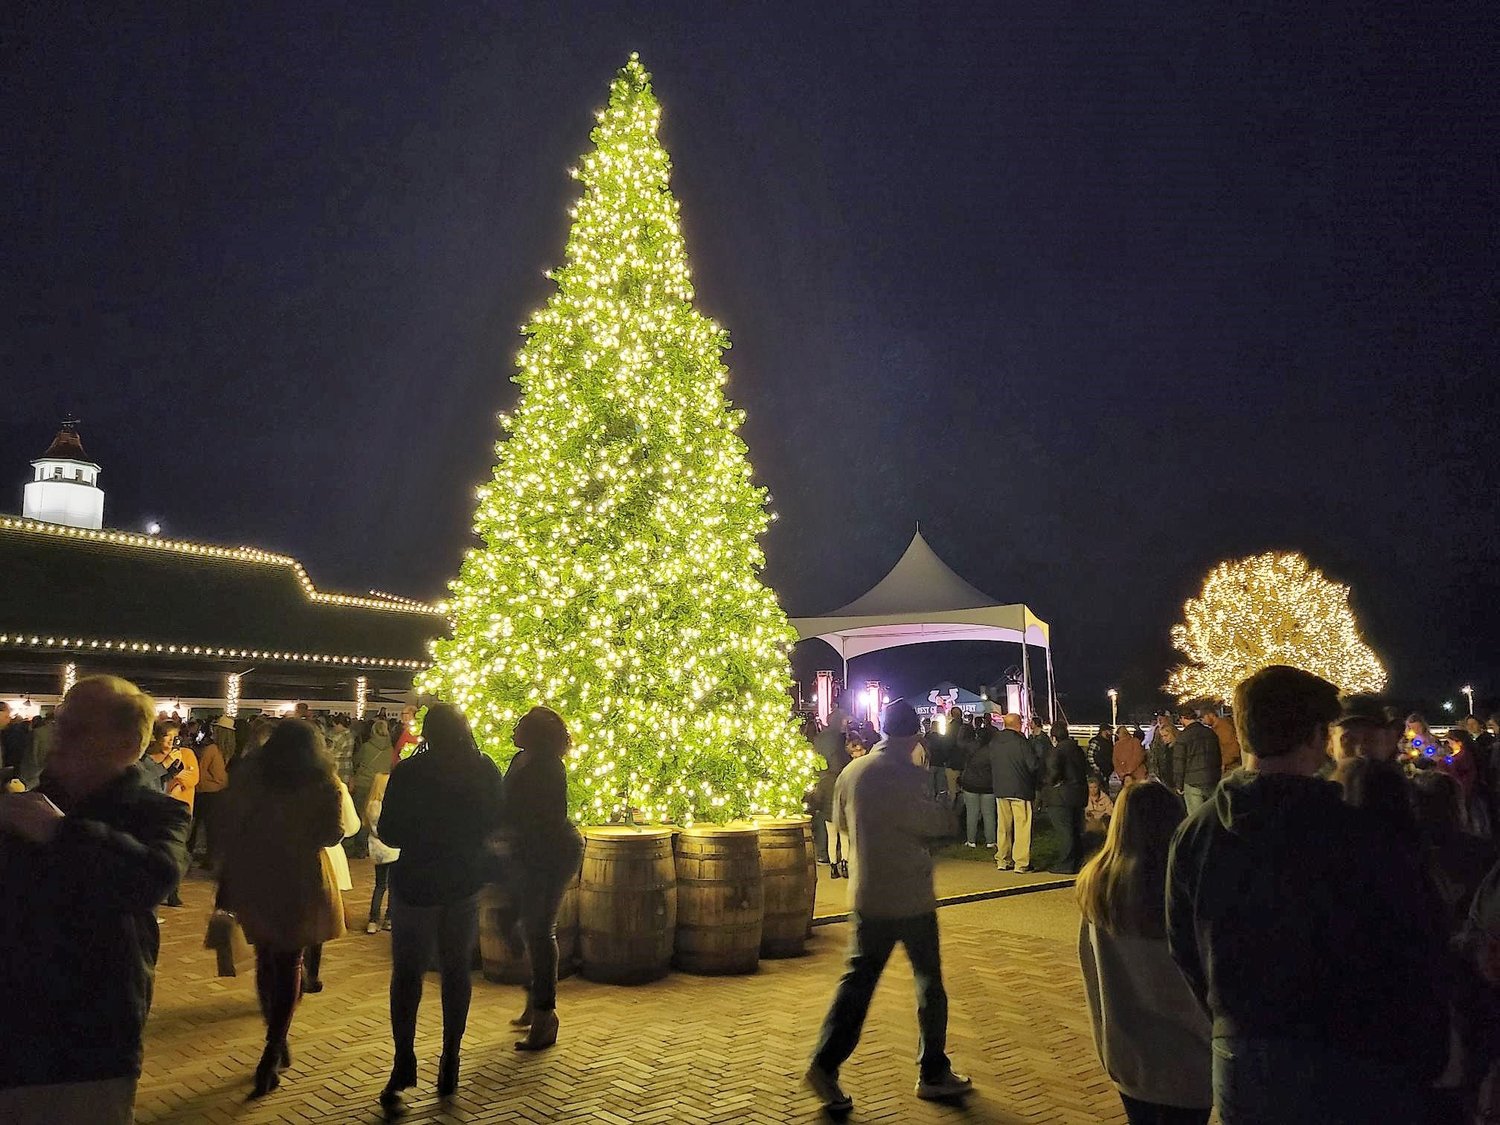 The distillery hosted a tree
lighting ceremony to celebrate
the Christmas season. Guests
were lined up for the evening’s
events. More photos, Page 8A.